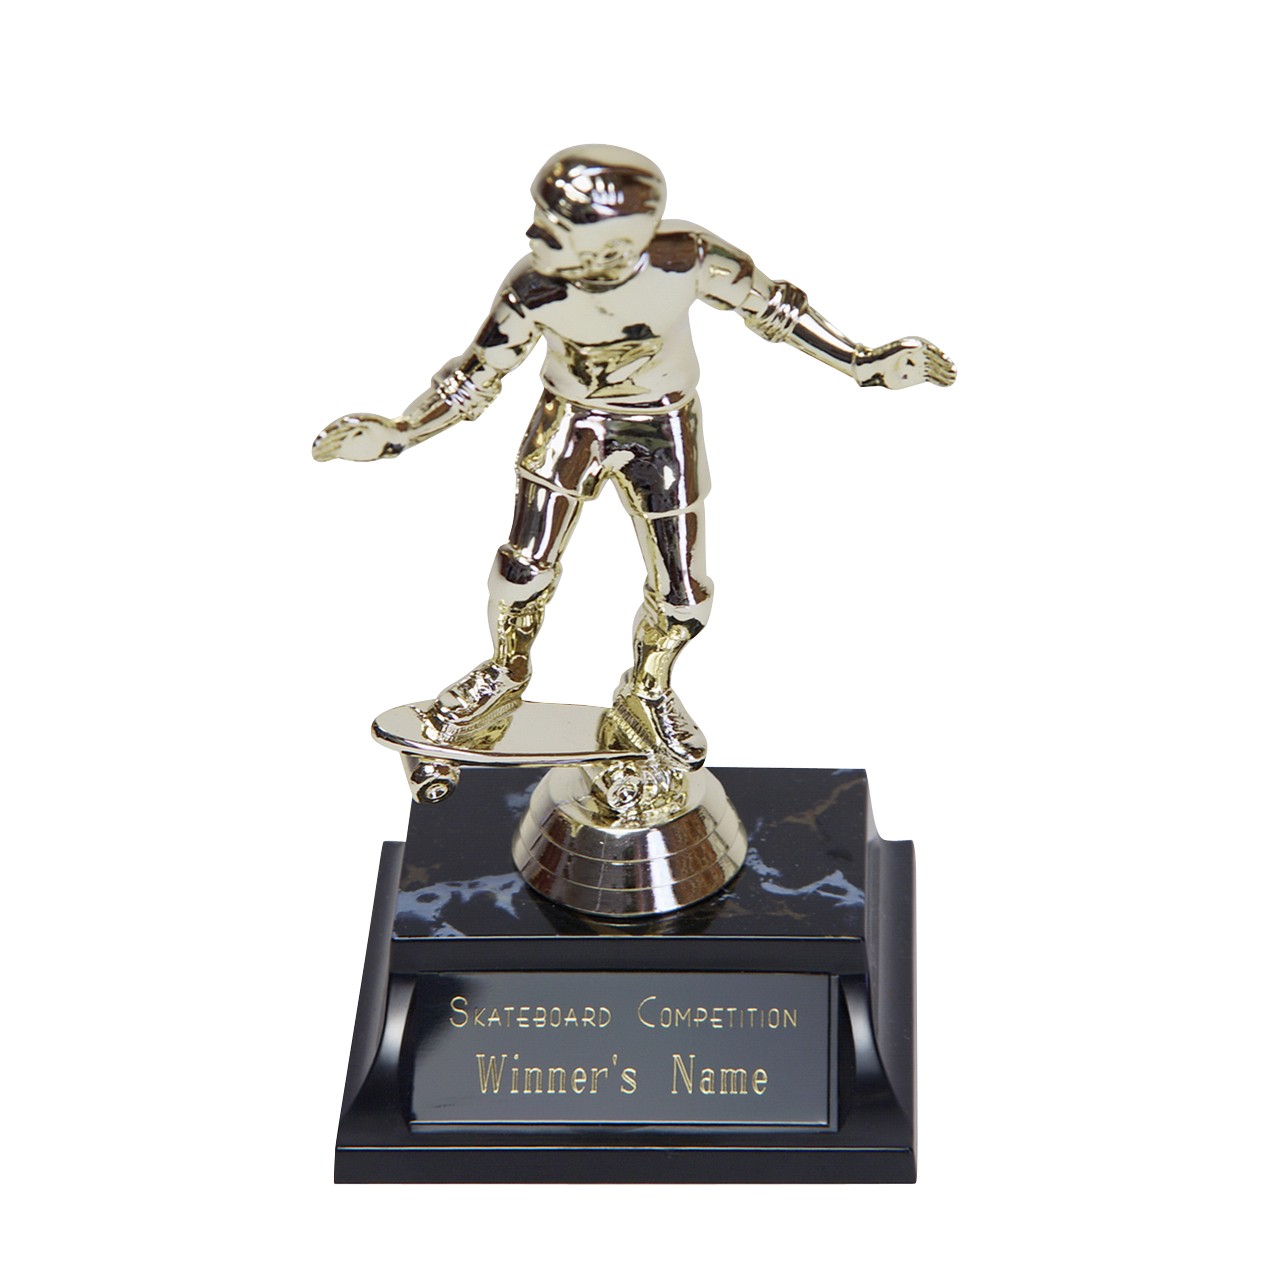 Crown Awards Skateboard Rider Trophies Gold Stars Skateboard Rider Trophy with Custom Engraving